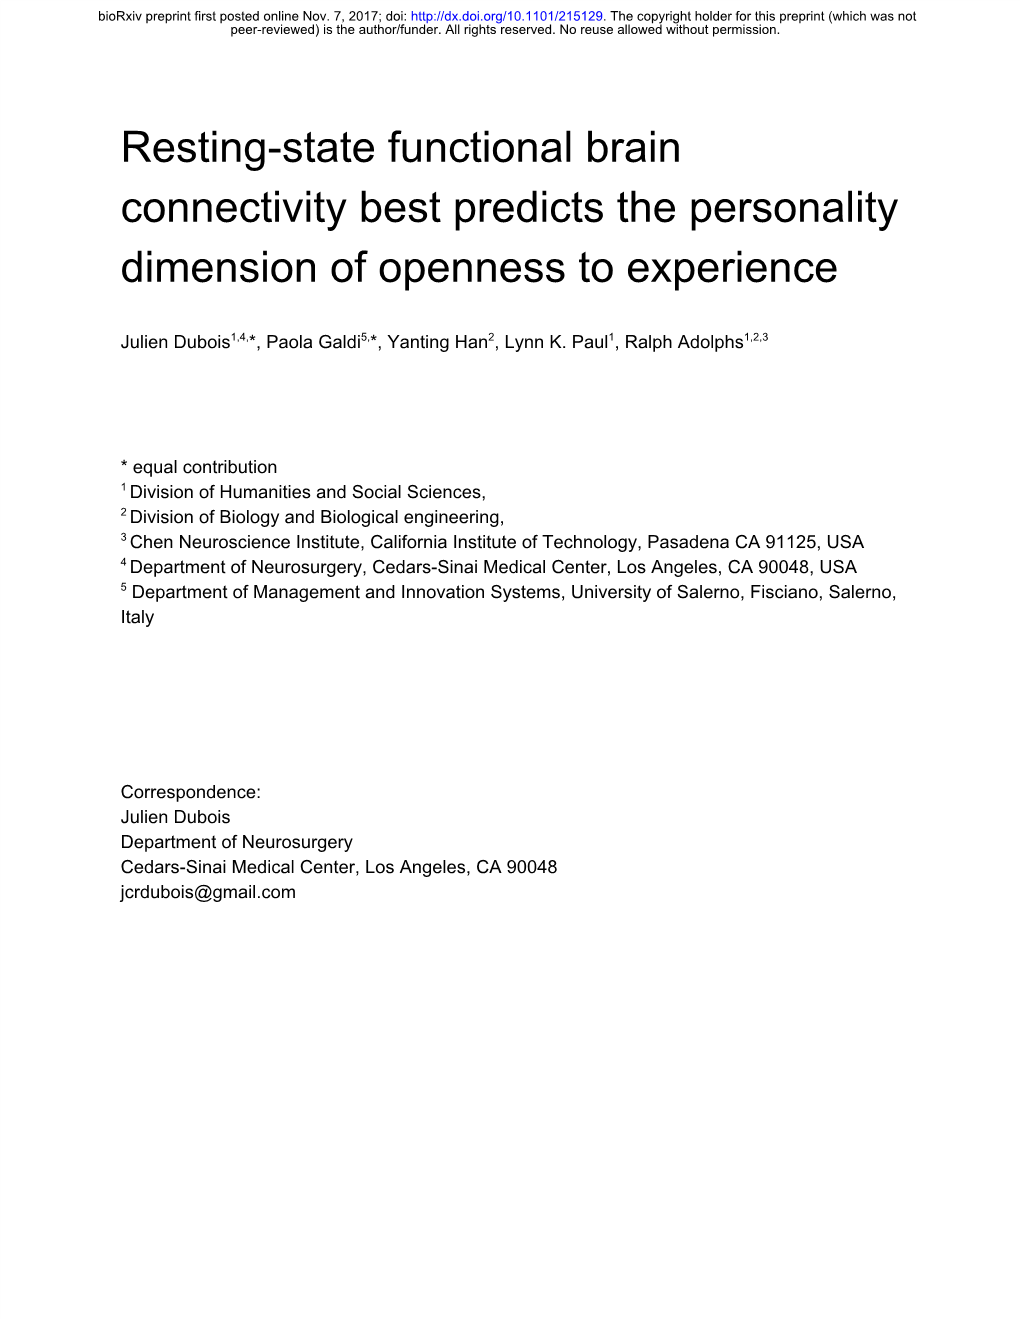 Resting-State Functional Brain Connectivity Best Predicts the Personality Dimension of Openness to Experience